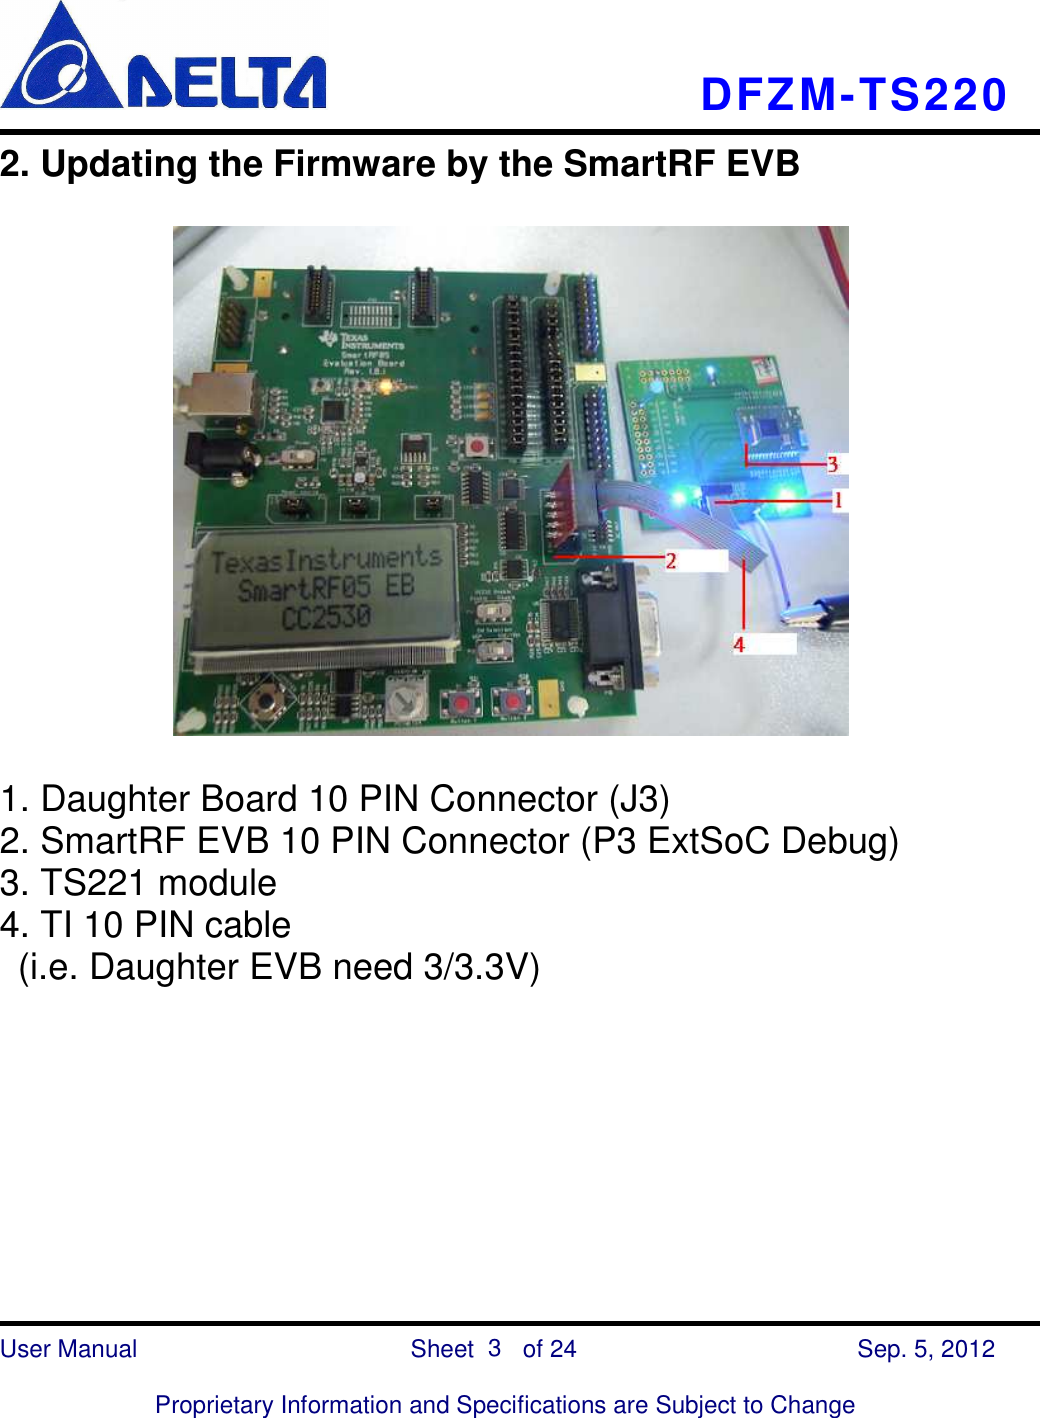    DFZM-TS220    User Manual                            Sheet        of 24      Sep. 5, 2012  Proprietary Information and Specifications are Subject to Change 3 2. Updating the Firmware by the SmartRF EVB    1. Daughter Board 10 PIN Connector (J3) 2. SmartRF EVB 10 PIN Connector (P3 ExtSoC Debug) 3. TS221 module 4. TI 10 PIN cable   (i.e. Daughter EVB need 3/3.3V)         